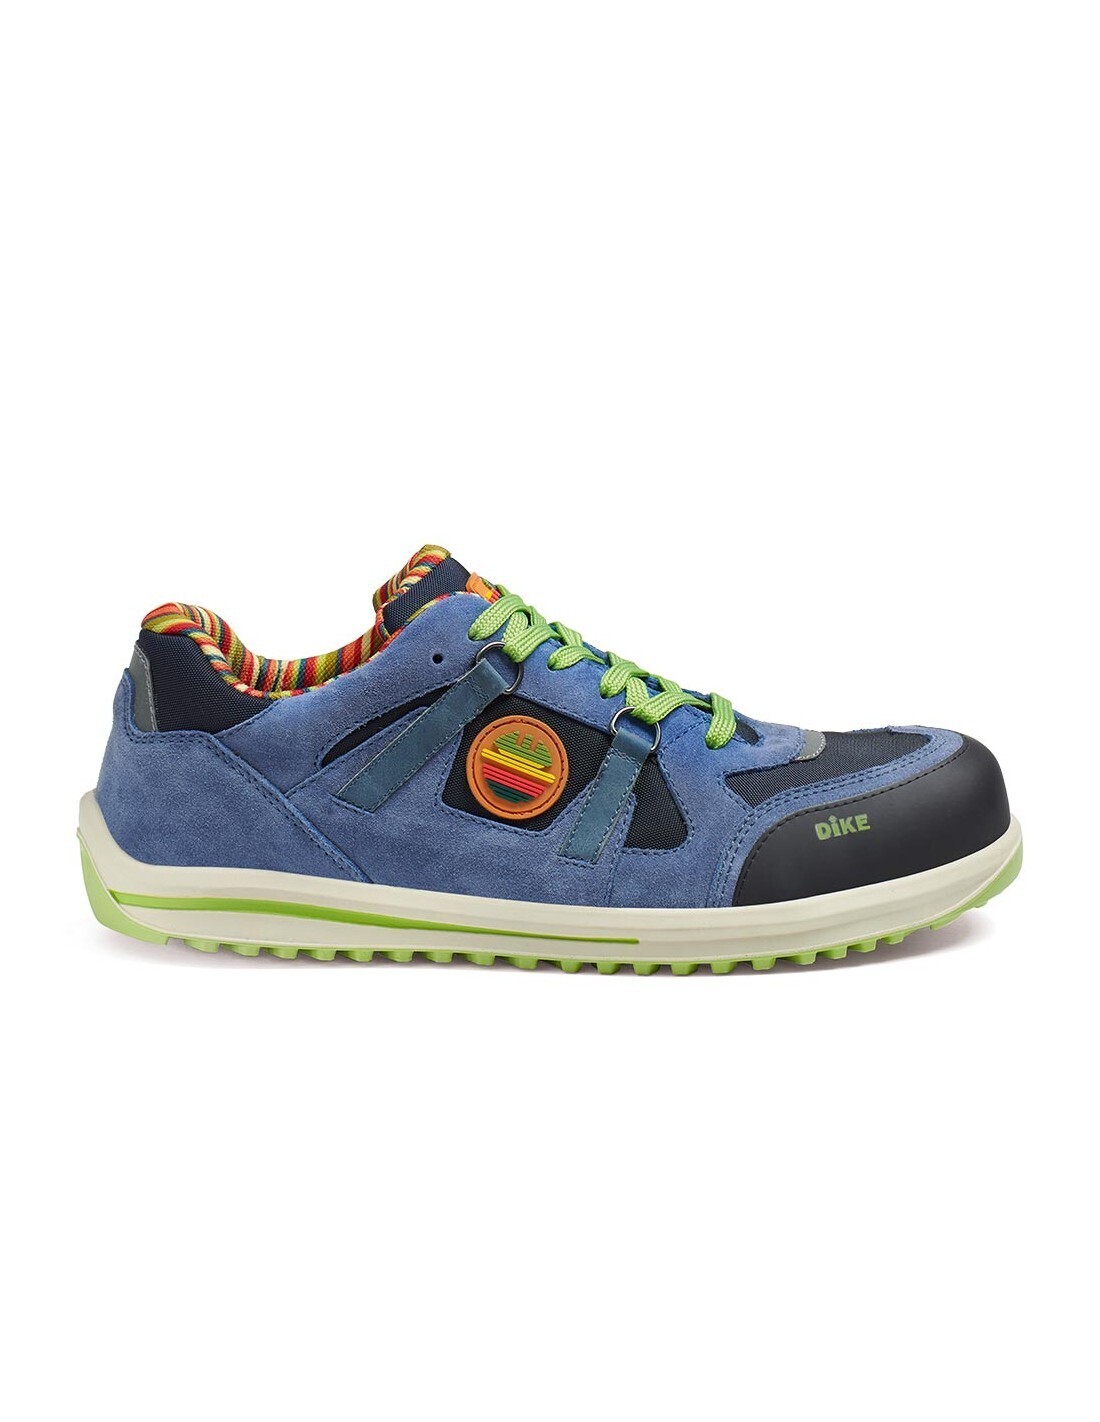 Dike - RANKING RELOAD S1 SRC colore NAVY